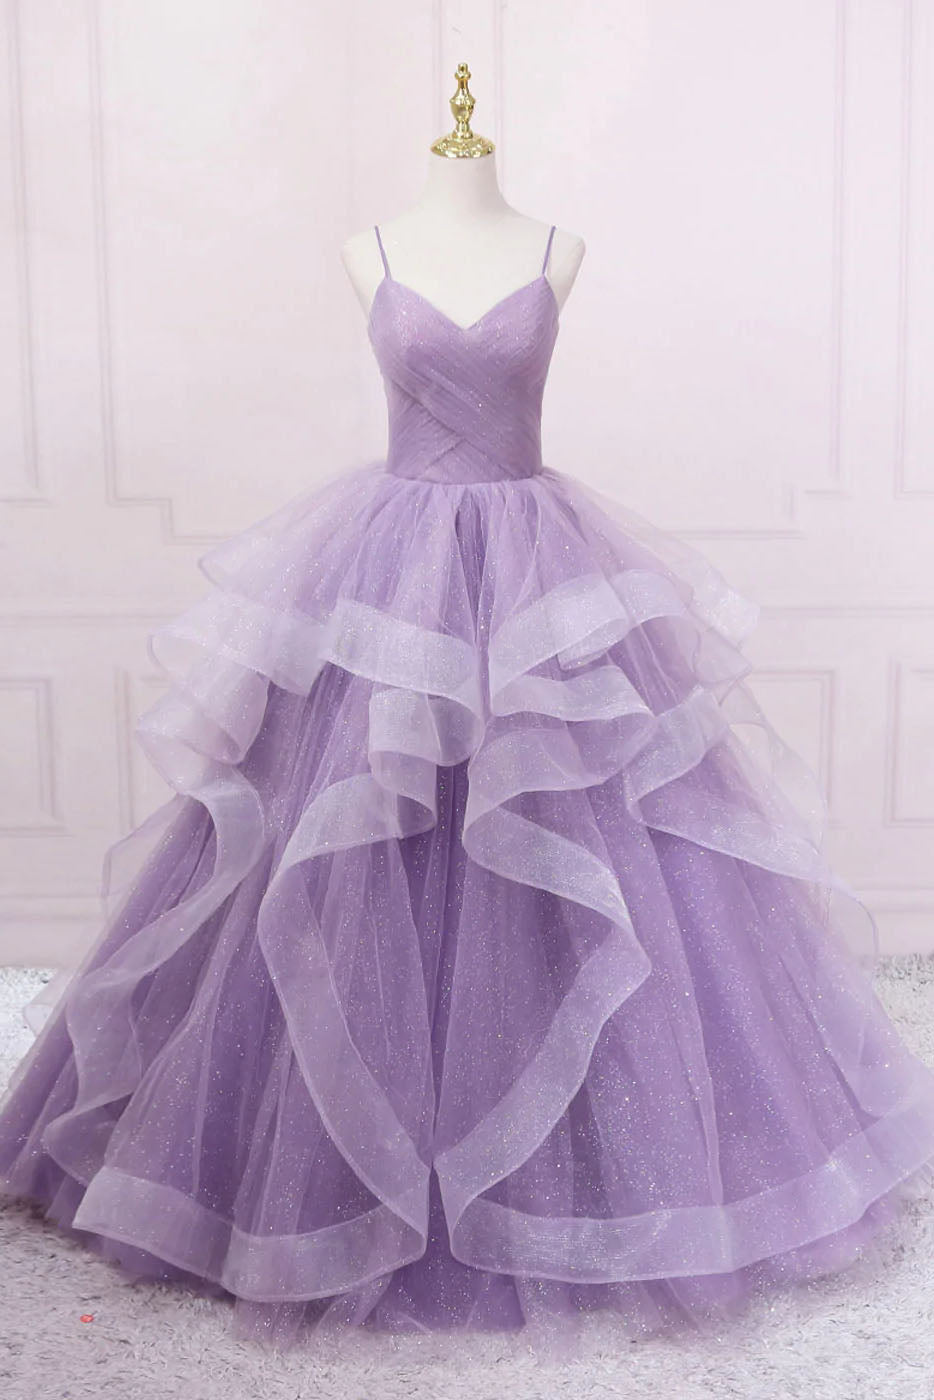 Party Dress Afternoon Tea, Princess Lavender Sparkly Spaghetti Straps Long Prom Dress Floor Length Evening Gown